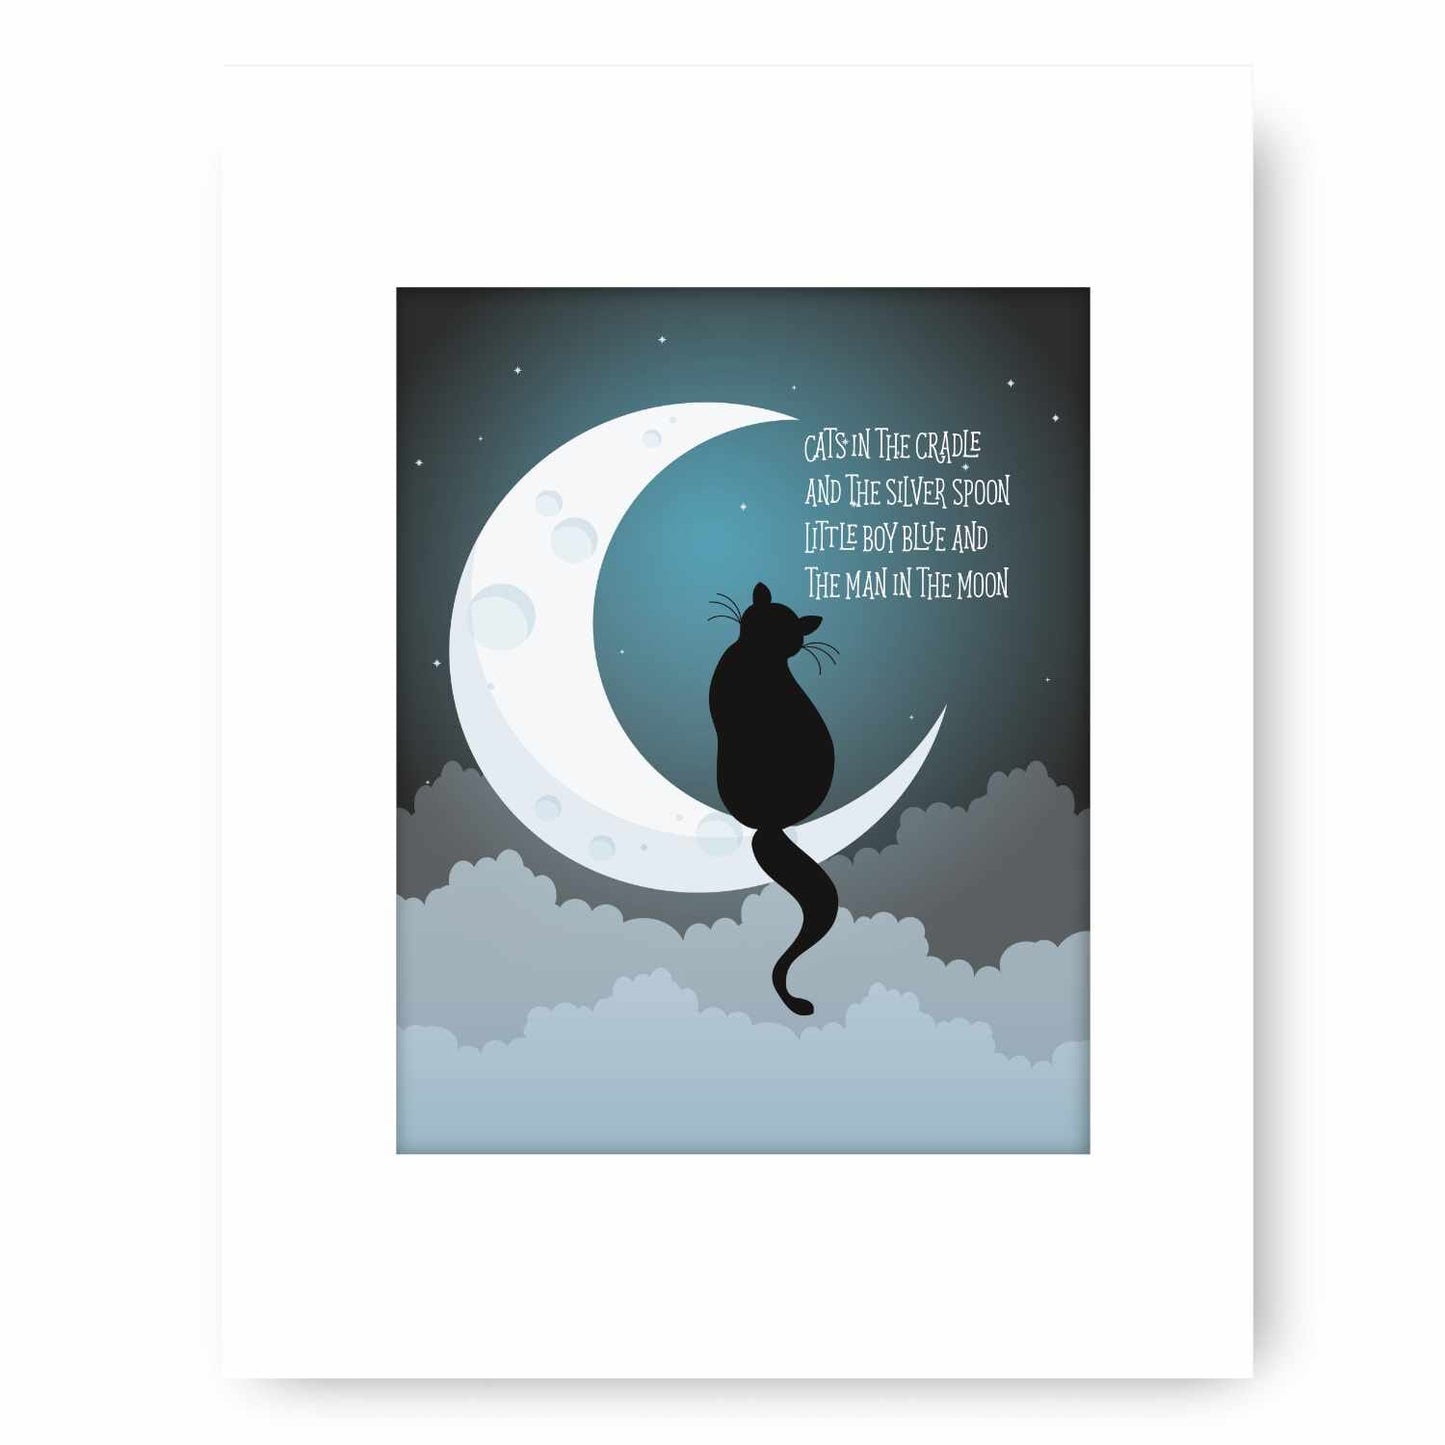 Cats in the Cradle by Harry Chapin - Children's 70s Lyric Art Song Lyrics Art Song Lyrics Art 8x10 White Matted Unframed Print 